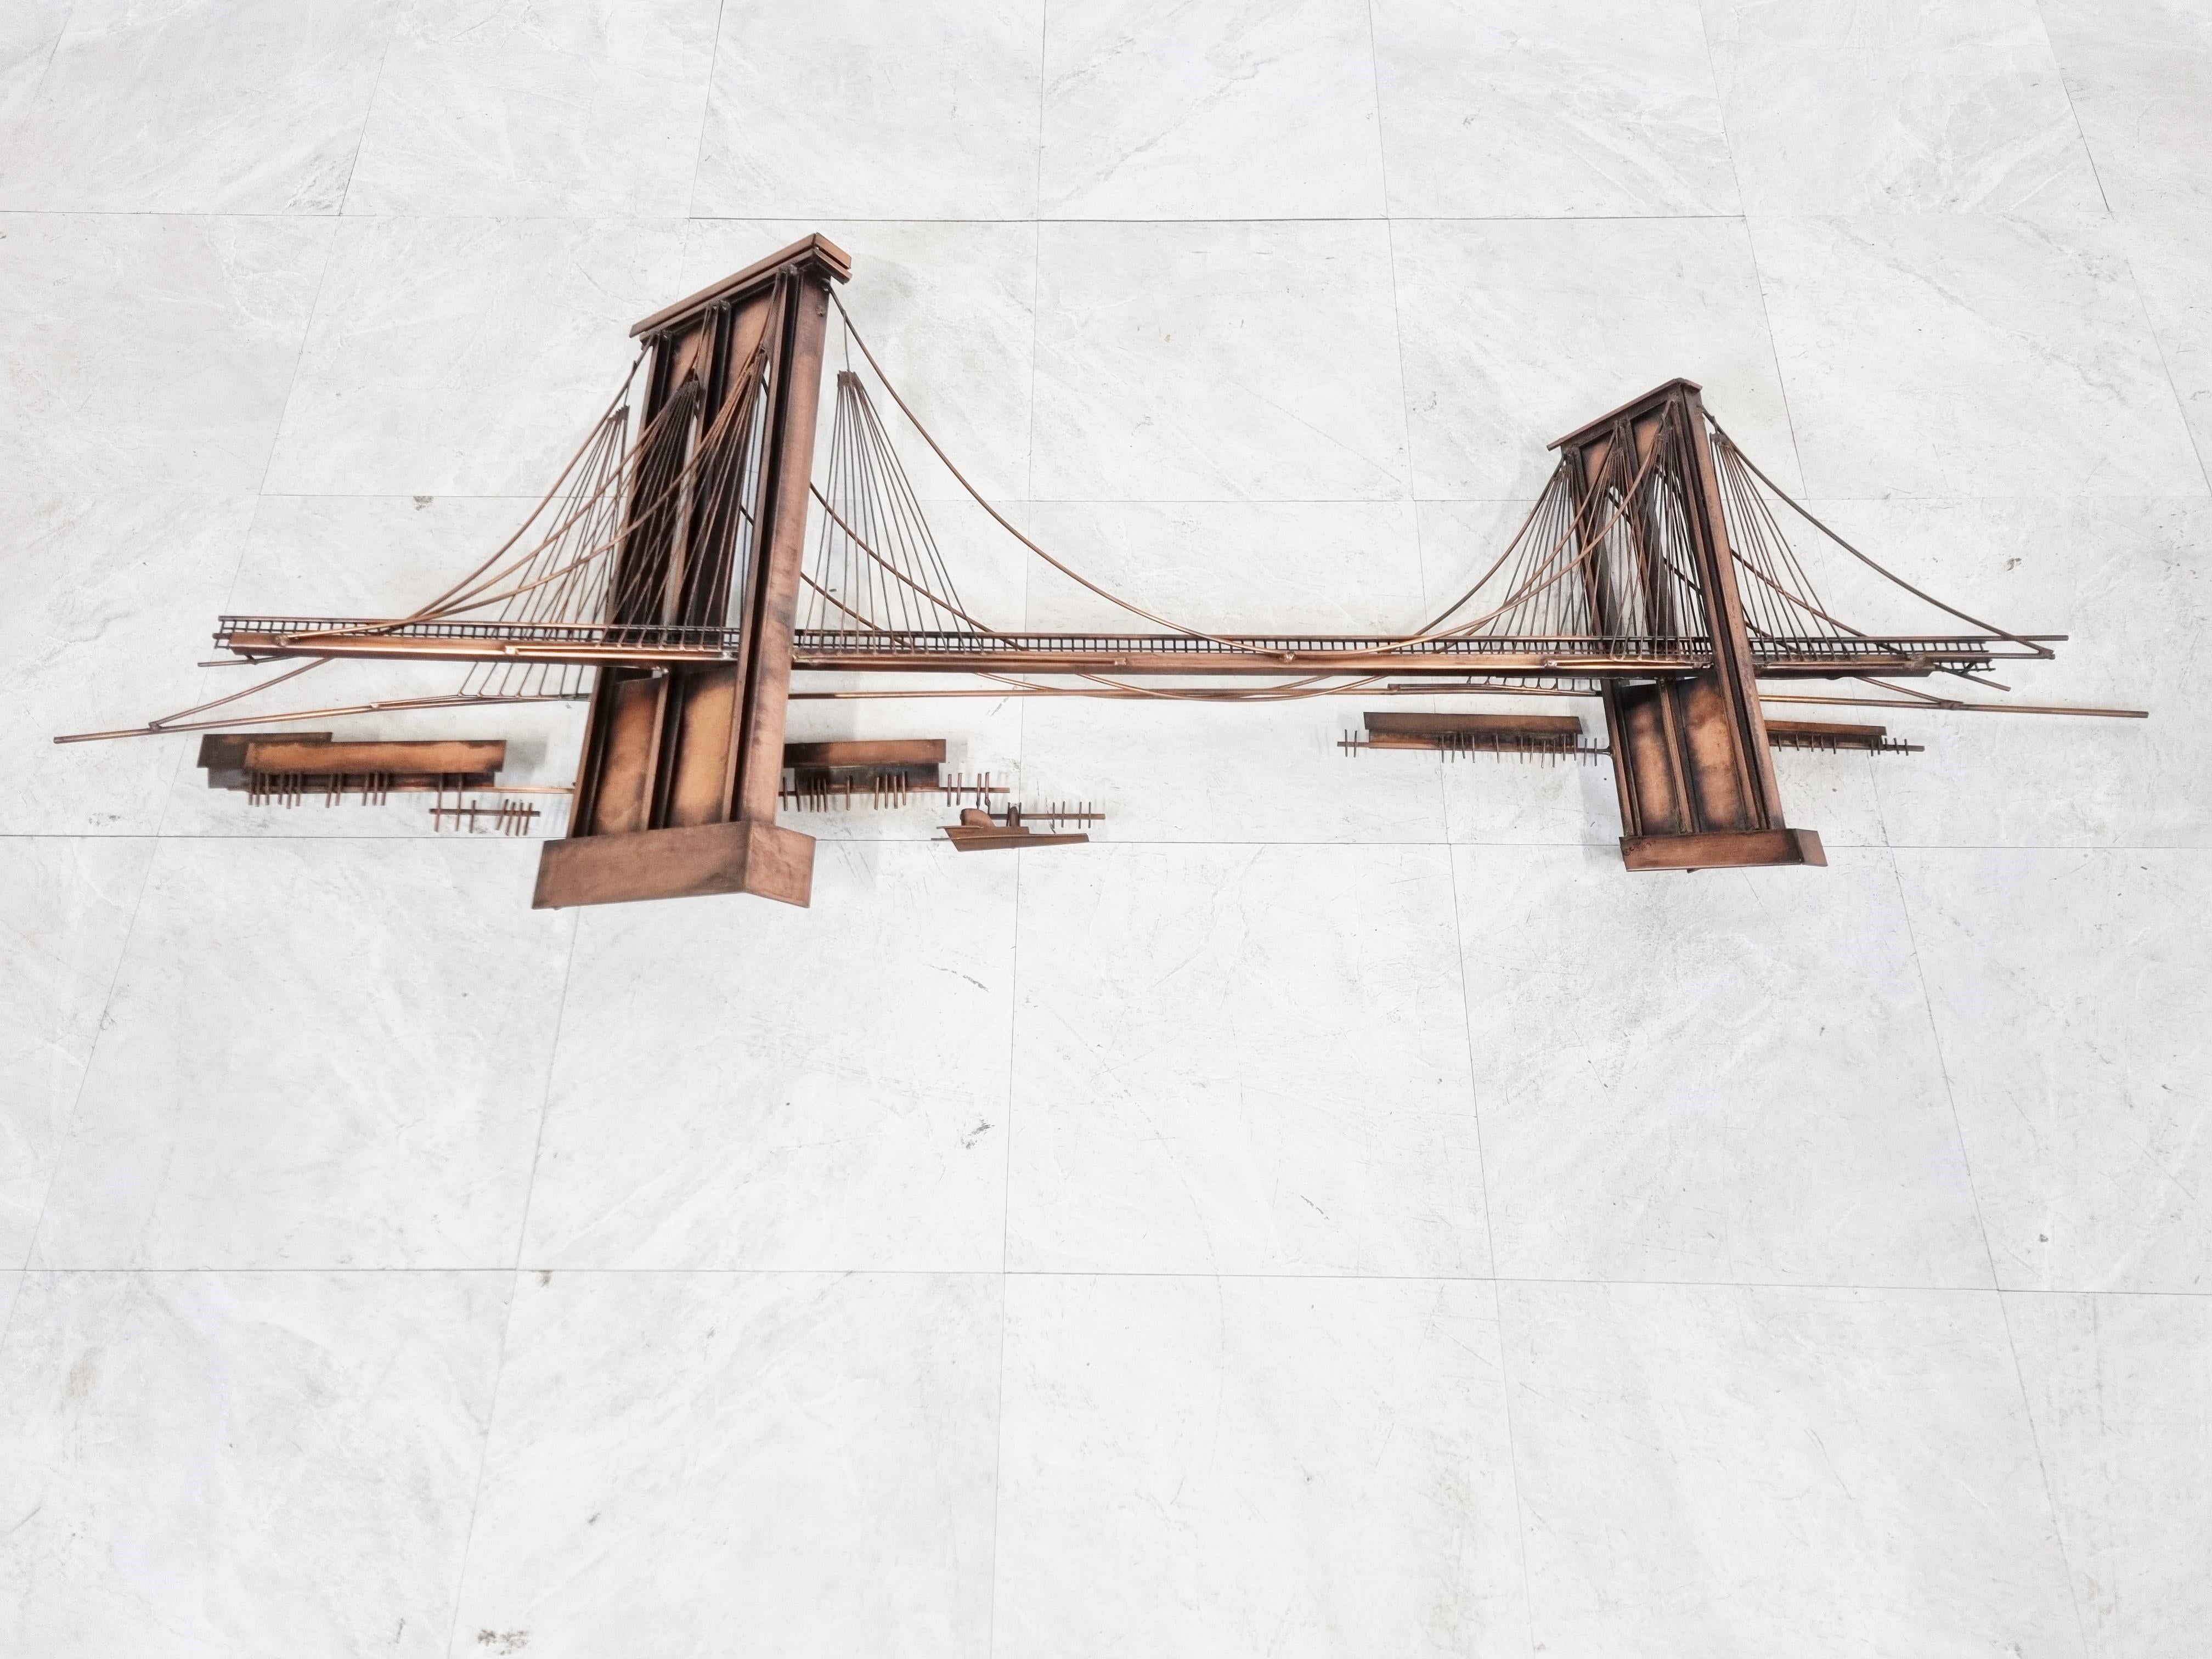 Impressive copper wall sculpturedepicting the Brooklyn bridge, signed by Curtis Jeré.

The sculpture is made to create a 3d effect of the bridge.

Good condition

1976 - Usa

Dimensions:
Height: 56cm/22.04